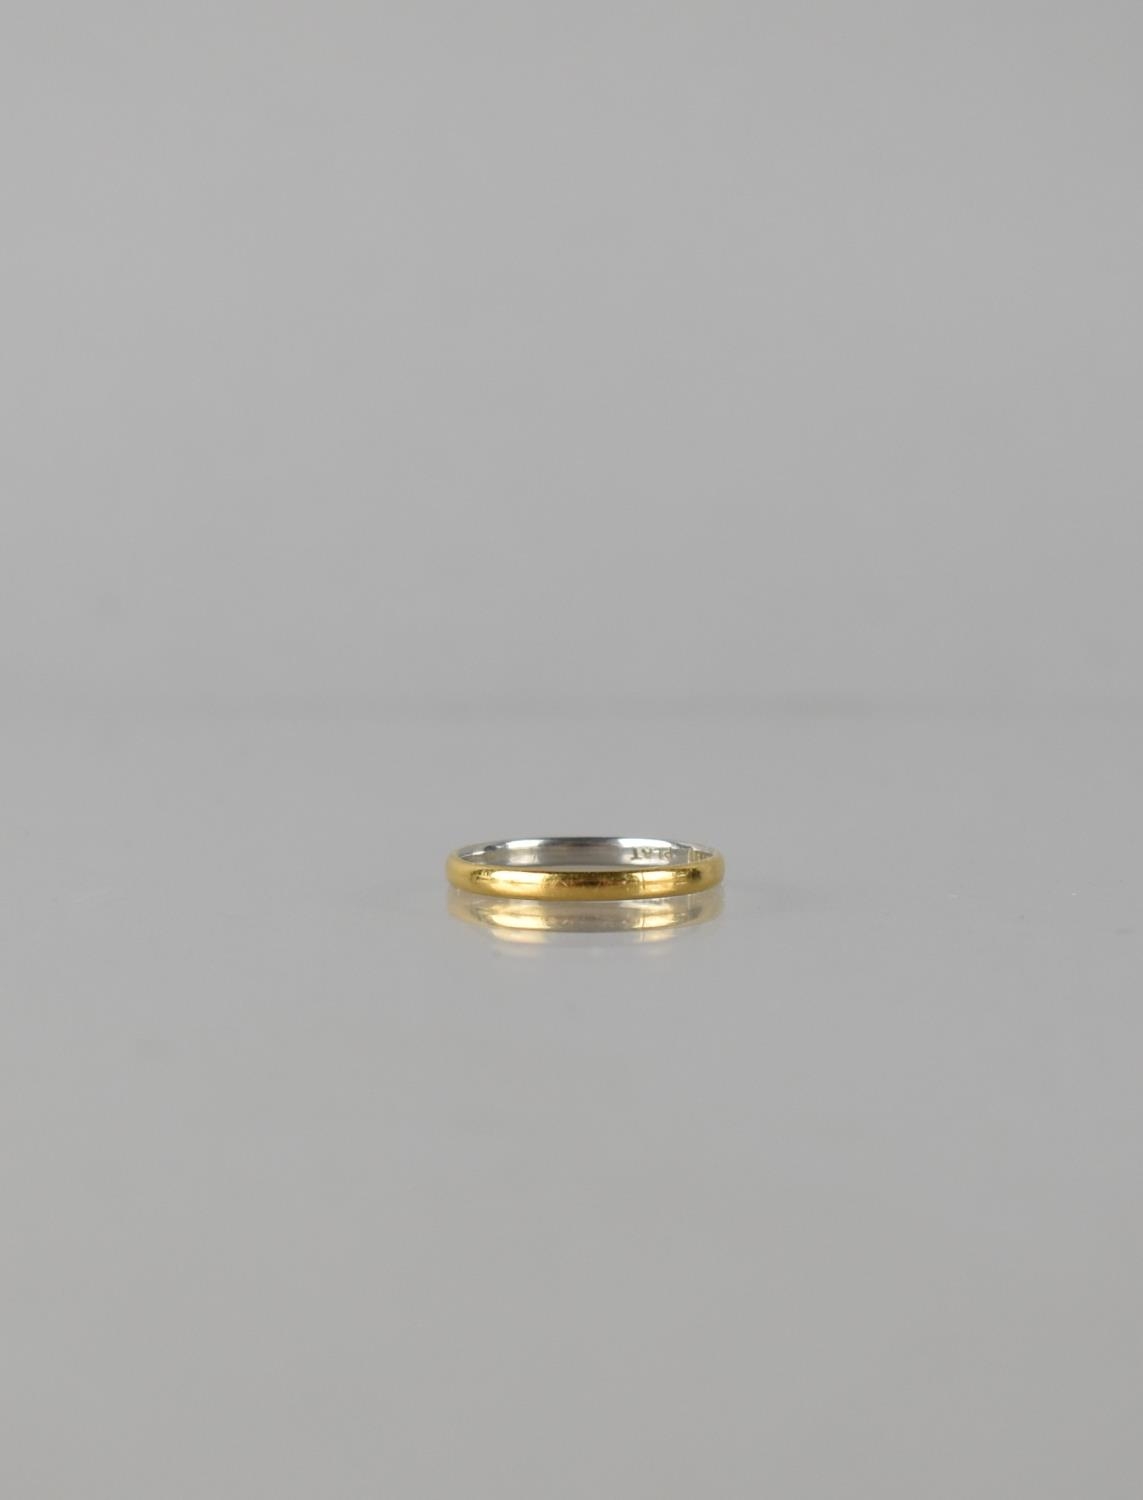 A 22ct Polished Gold and Platinum Ring, Interior Stamped 'Fidelity', 'Plat' 1.6gms, Size K.5